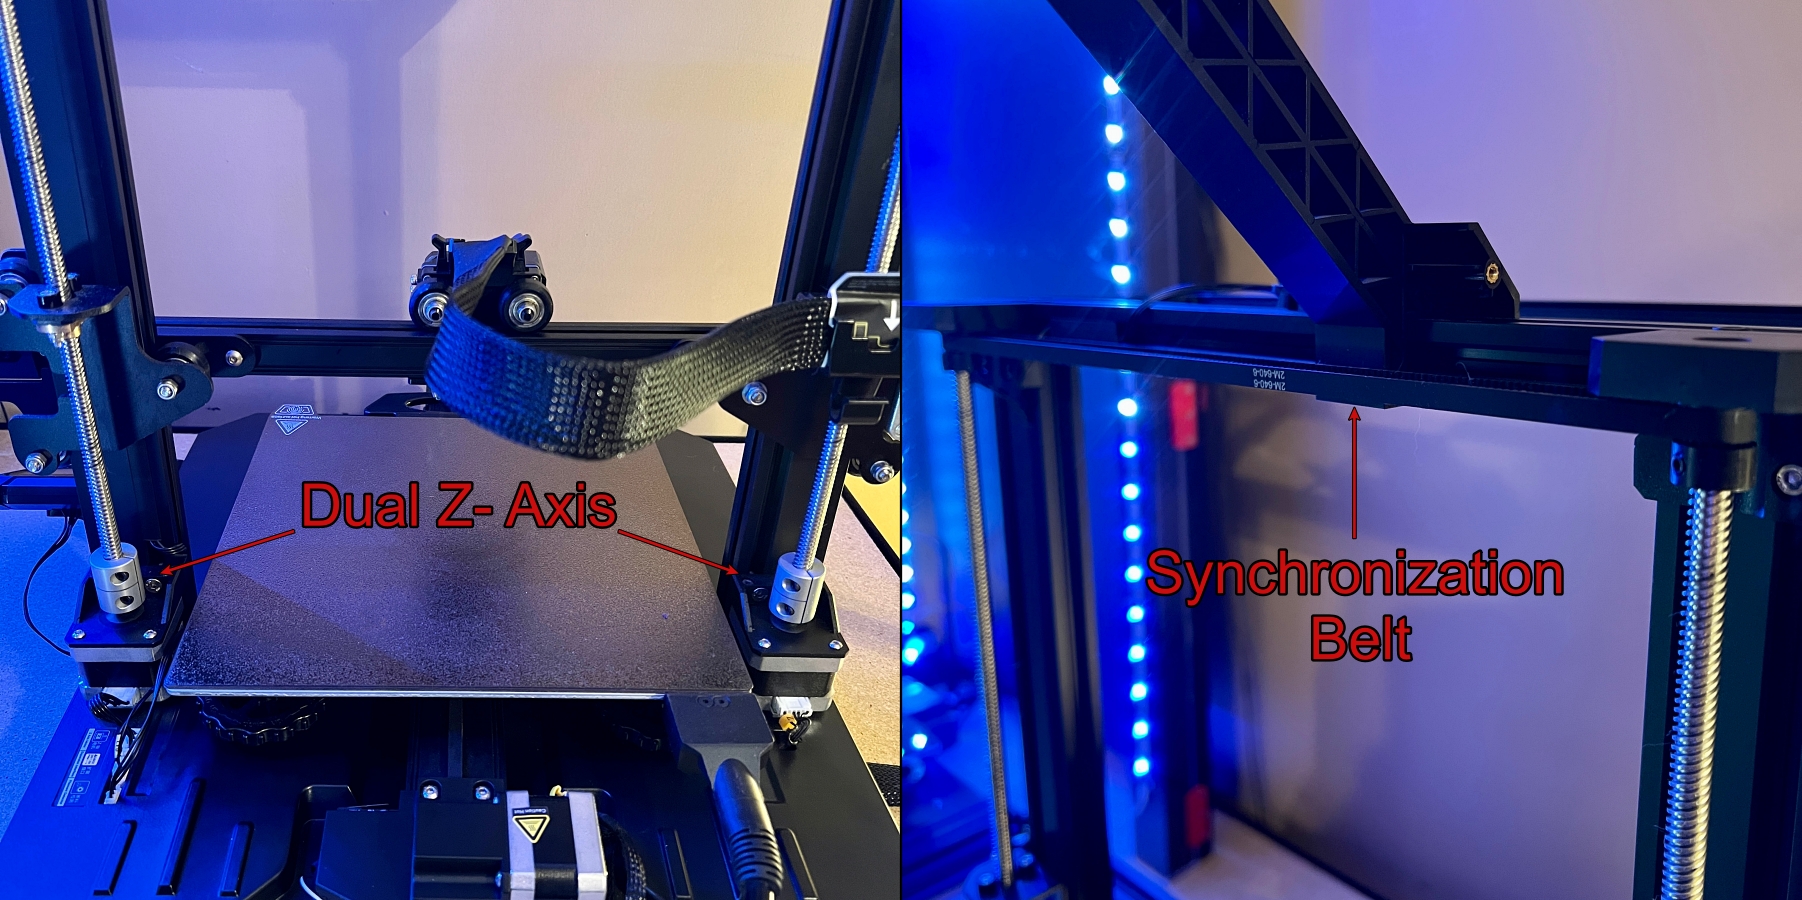 Creality Ender 3 S1 Pro Review: All the Bells and Whistles